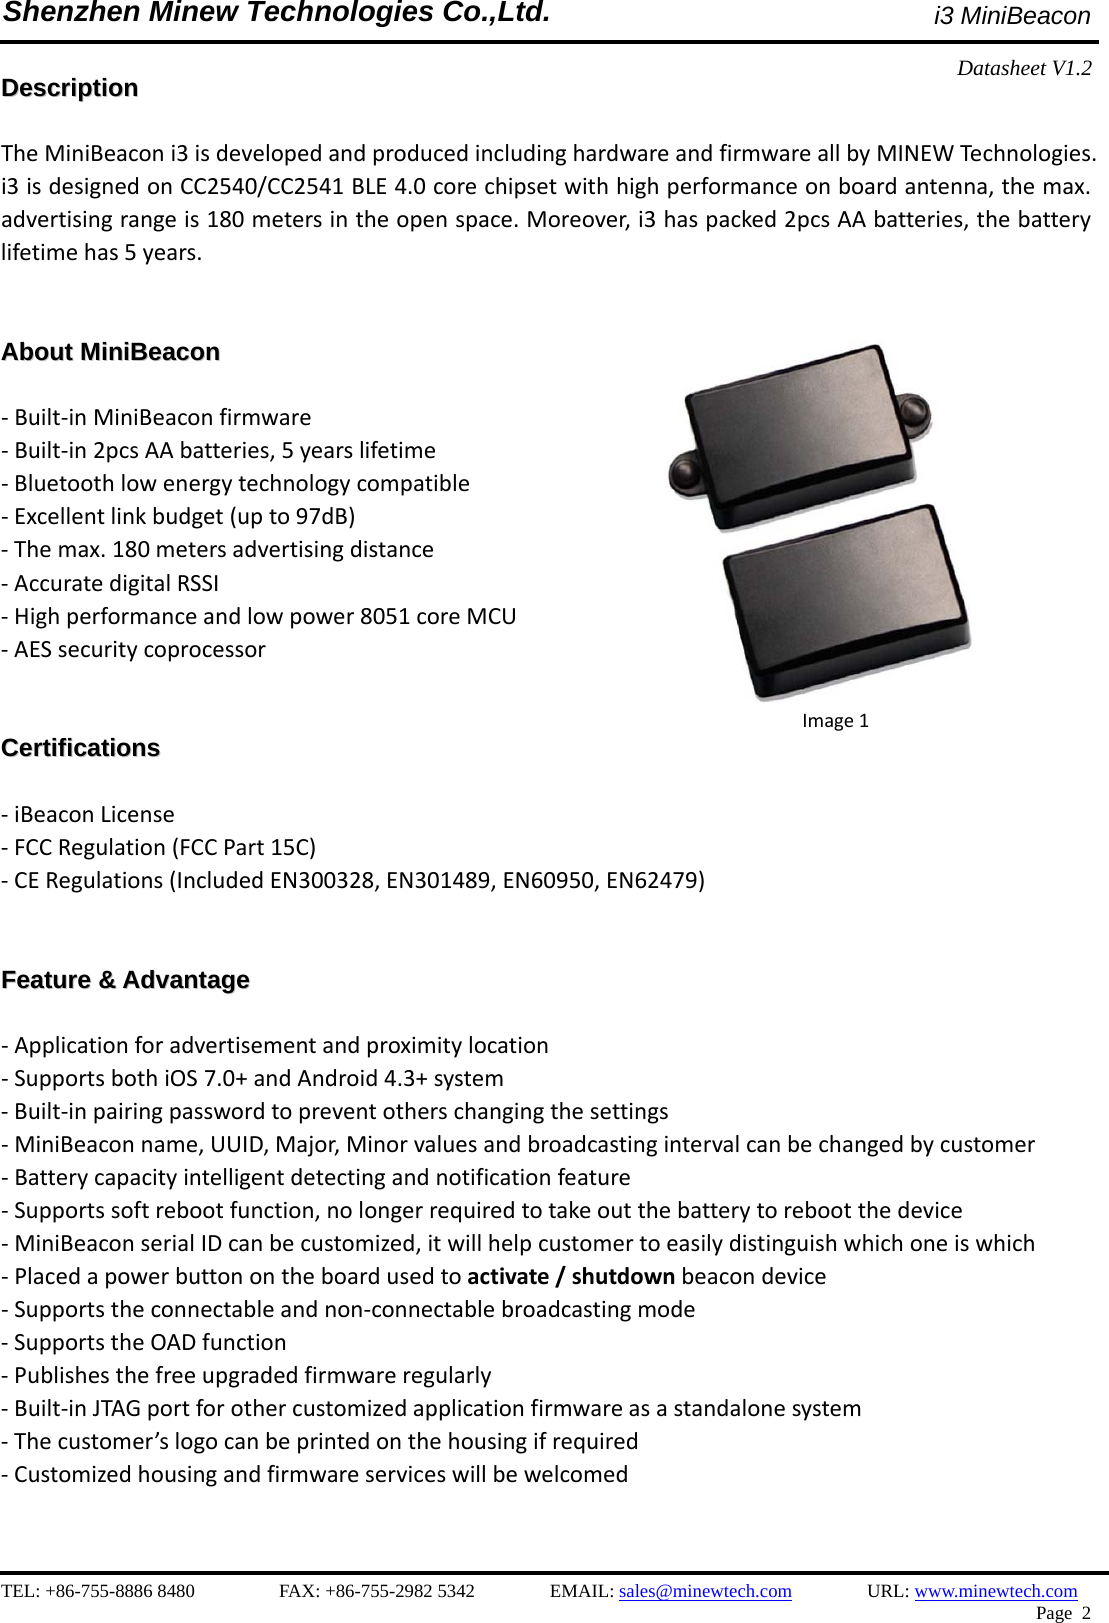    TEL: +86-755-8886 8480         FAX: +86-755-2982 5342        EMAIL: sales@minewtech.com        URL: www.minewtech.com  Page 2  Shenzhen Minew Technologies Co.,Ltd.                               i3 MiniBeacon Datasheet V1.2   DDeessccrriippttiioonn   TheMiniBeaconi3isdevelopedandproducedincludinghardwareandfirmwareallbyMINEWTechnologies.i3isdesignedonCC2540/CC2541BLE4.0corechipsetwithhighperformanceonboardantenna,themax.advertisingrangeis180metersintheopenspace.Moreover,i3haspacked2pcsAAbatteries,thebatterylifetimehas5years.  AAbboouutt  MMiinniiBBeeaaccoonn   ‐Built‐inMiniBeaconfirmware‐Built‐in2pcsAAbatteries,5yearslifetime‐Bluetoothlowenergytechnologycompatible‐Excellentlinkbudget(upto97dB)‐Themax.180metersadvertisingdistance‐AccuratedigitalRSSI‐Highperformanceandlowpower8051coreMCU‐AESsecuritycoprocessorCCeerrttiiffiiccaattiioonnss  ‐iBeaconLicense‐FCCRegulation(FCCPart15C)‐CERegulations(IncludedEN300328,EN301489,EN60950,EN62479)FFeeaattuurree  &amp;&amp;  AAddvvaannttaaggee   ‐Applicationforadvertisementandproximitylocation‐SupportsbothiOS7.0+andAndroid4.3+system‐Built‐inpairingpasswordtopreventotherschangingthesettings‐MiniBeaconname,UUID,Major,Minorvaluesandbroadcastingintervalcanbechangedbycustomer‐Batterycapacityintelligentdetectingandnotificationfeature‐Supportssoftrebootfunction,nolongerrequiredtotakeoutthebatterytorebootthedevice‐MiniBeaconserialIDcanbecustomized,itwillhelpcustomertoeasilydistinguishwhichoneiswhich‐Placedapowerbuttonontheboardusedtoactivate/shutdownbeacondevice‐Supportstheconnectableandnon‐connectablebroadcastingmode‐SupportstheOADfunction‐Publishesthefreeupgradedfirmwareregularly‐Built‐inJTAGportforothercustomizedapplicationfirmwareasastandalonesystem‐Thecustomer’slogocanbeprintedonthehousingifrequired‐Customizedhousingandfirmwareserviceswillbewelcomed                    Image1